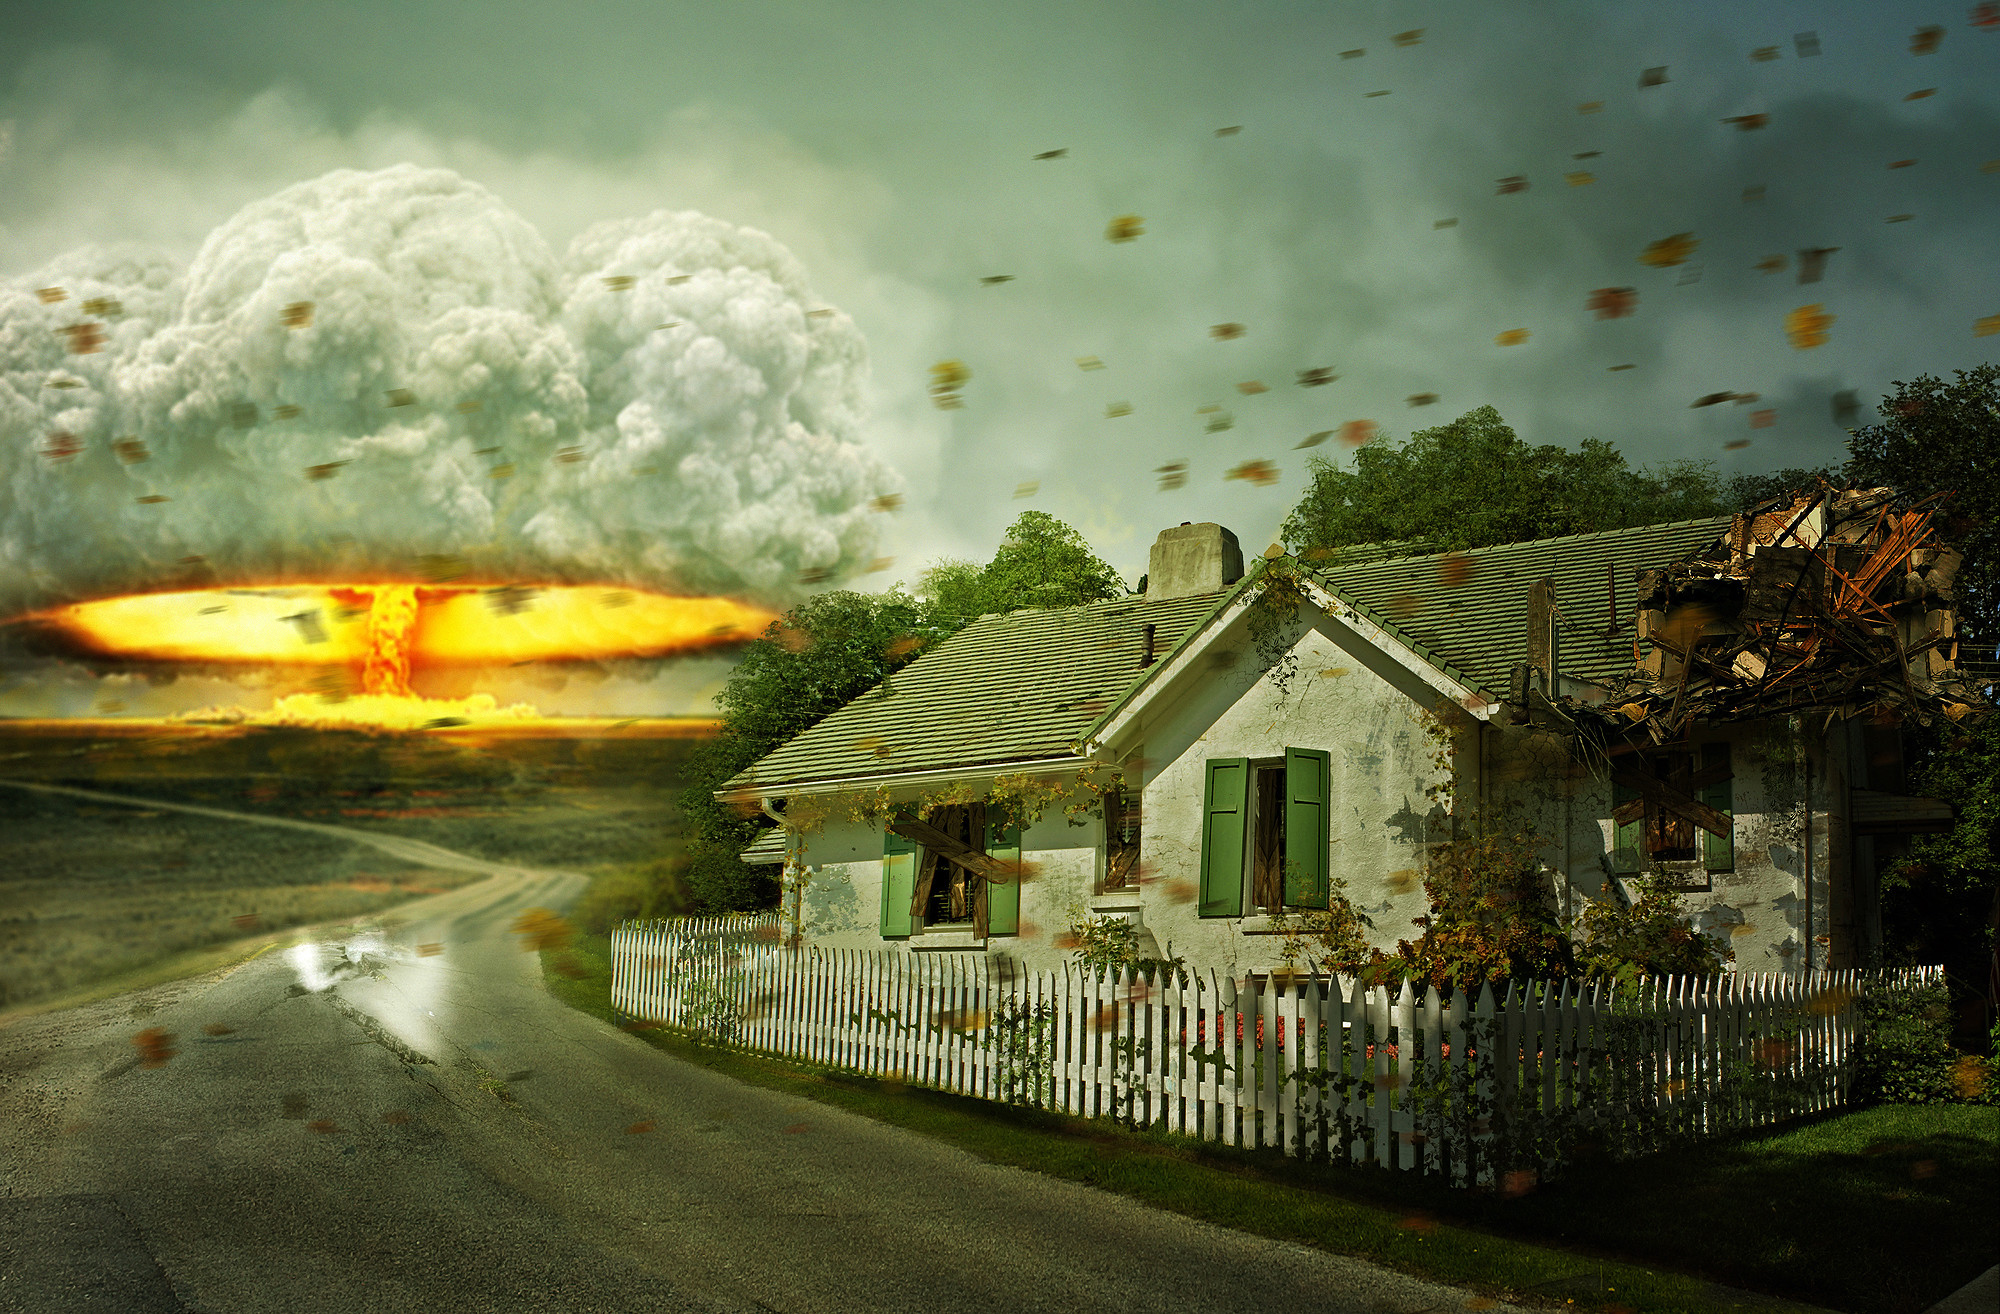 2000x1314 Atomic bomb explosion over city buildings HD Wallpaper -  http://www.hdwallpaperuniverse.com/atomic-bomb-explosion-city-buildings-hd- wallpaper/ | Pinterest ...